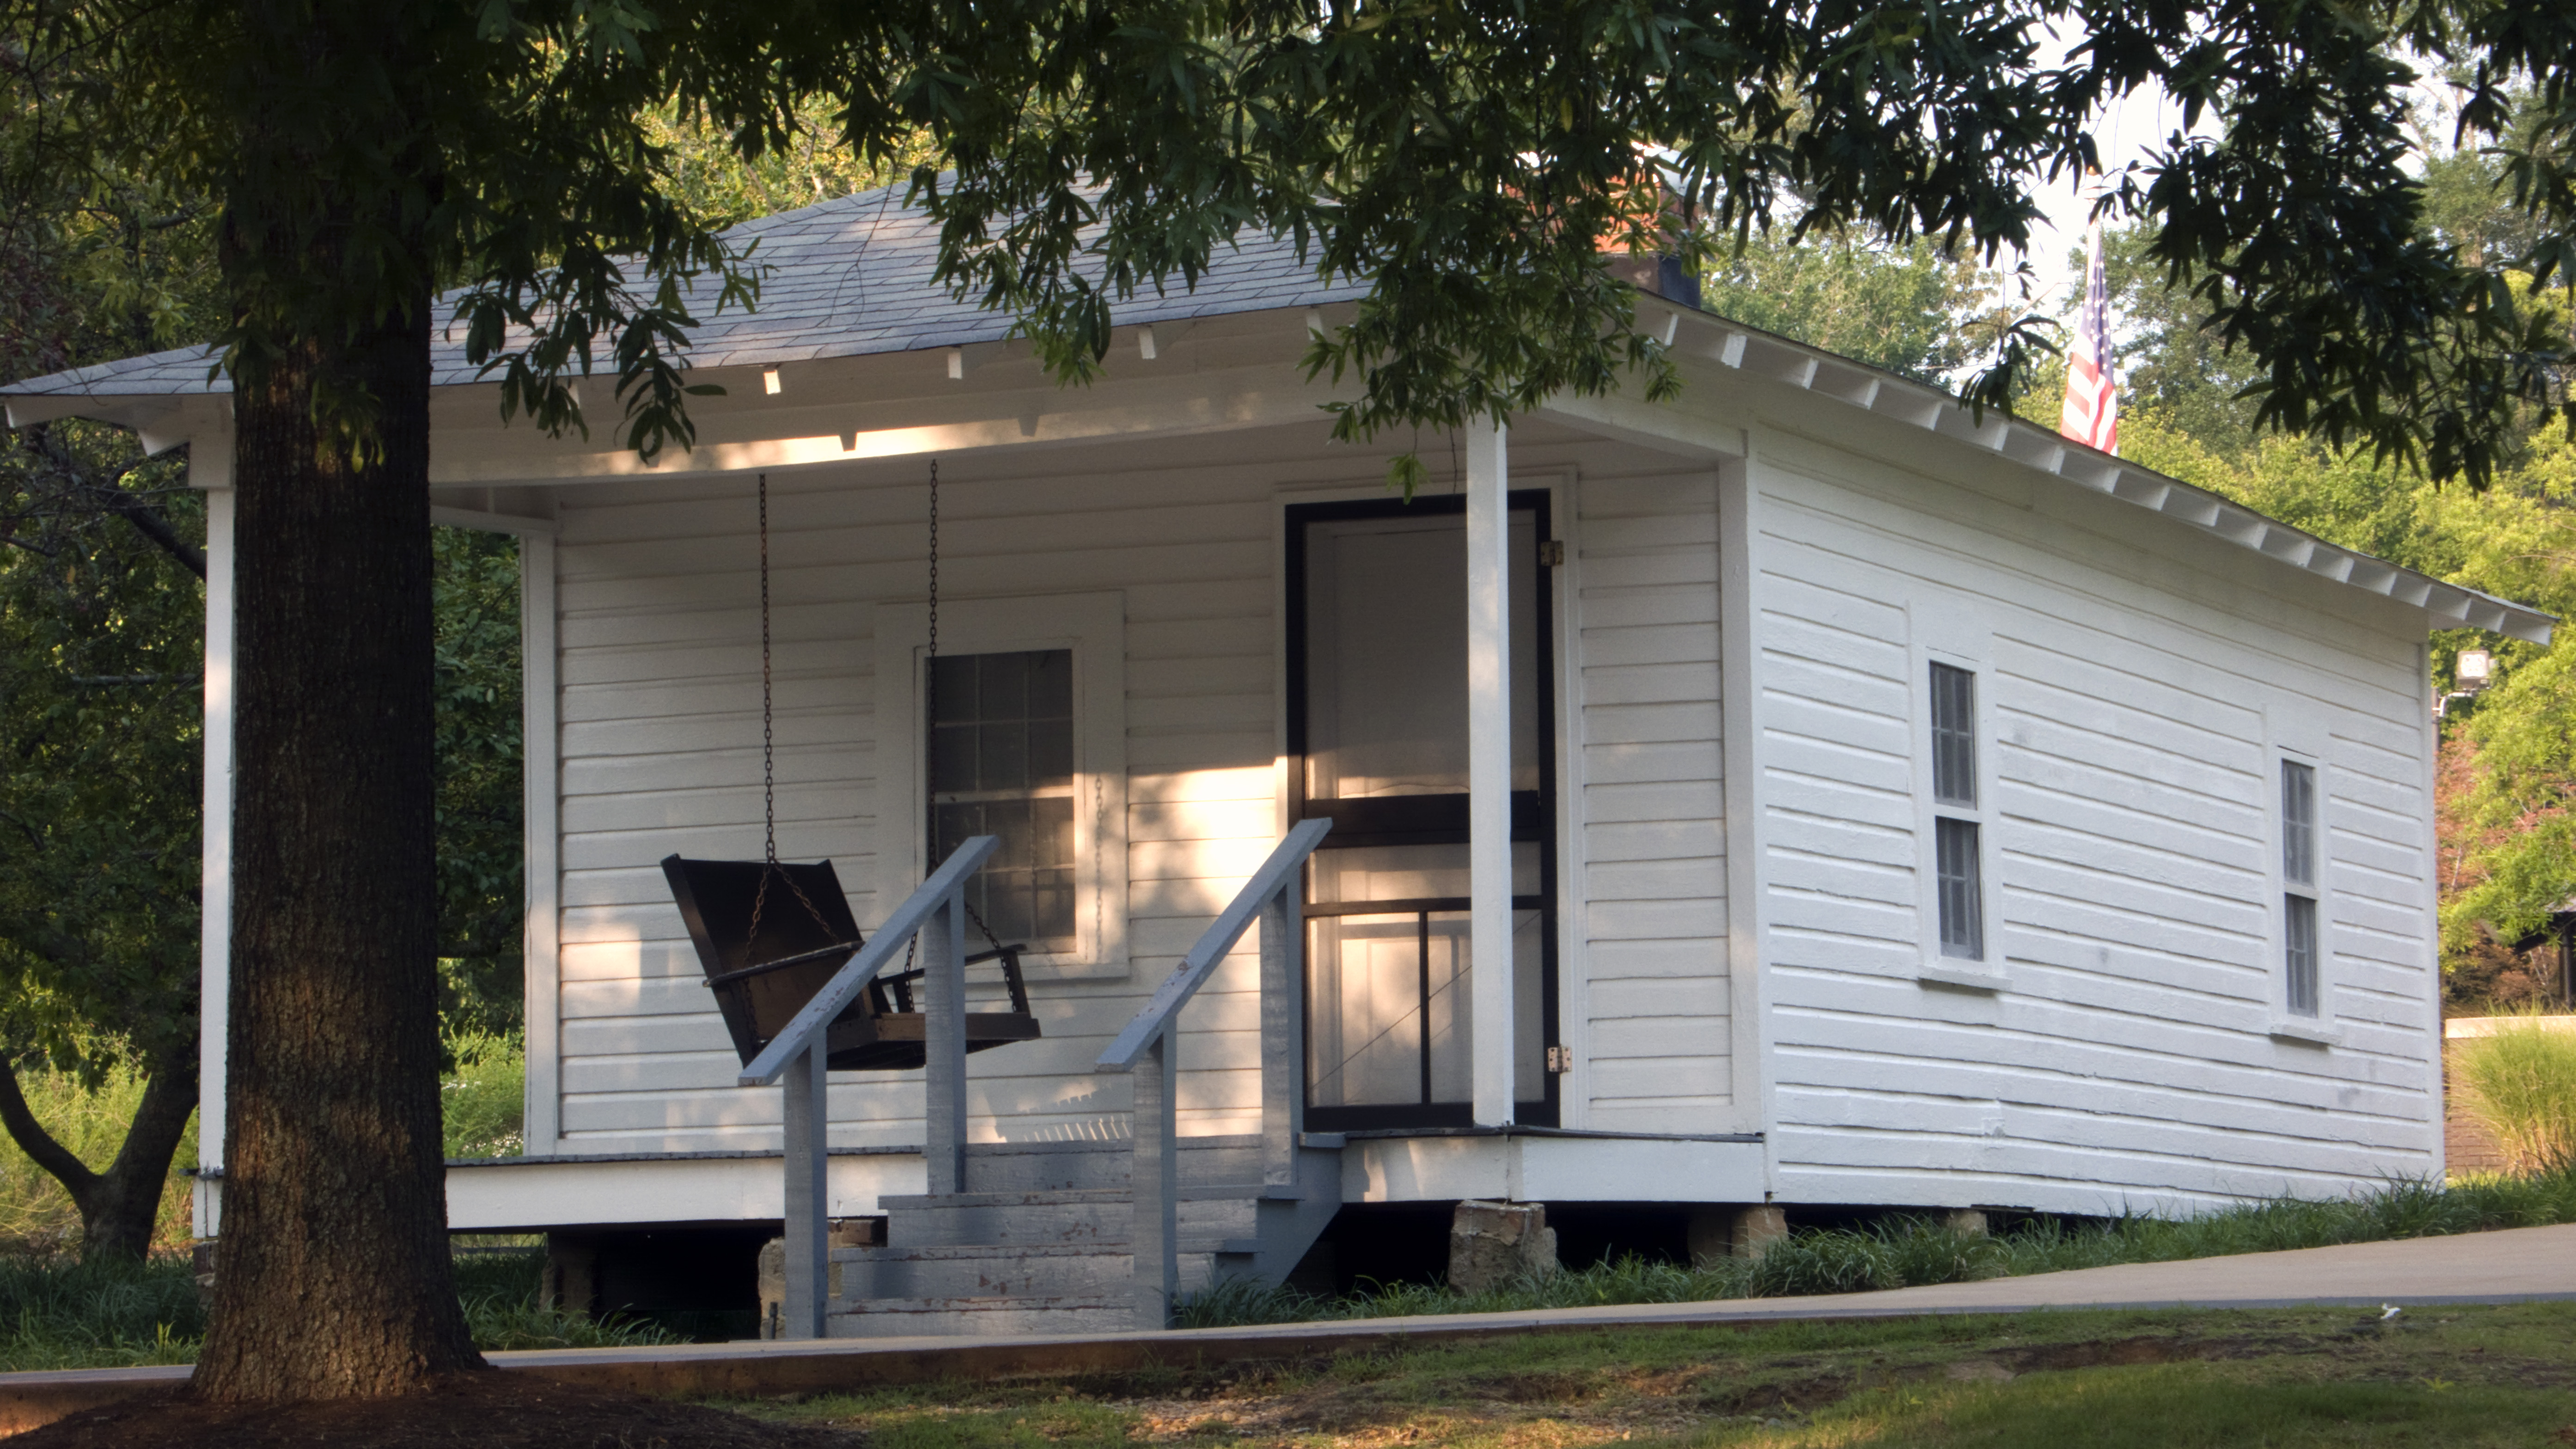 Elvis Presley's childhood home and birthplace in Tupelo Mississippi | Source: Getty Images